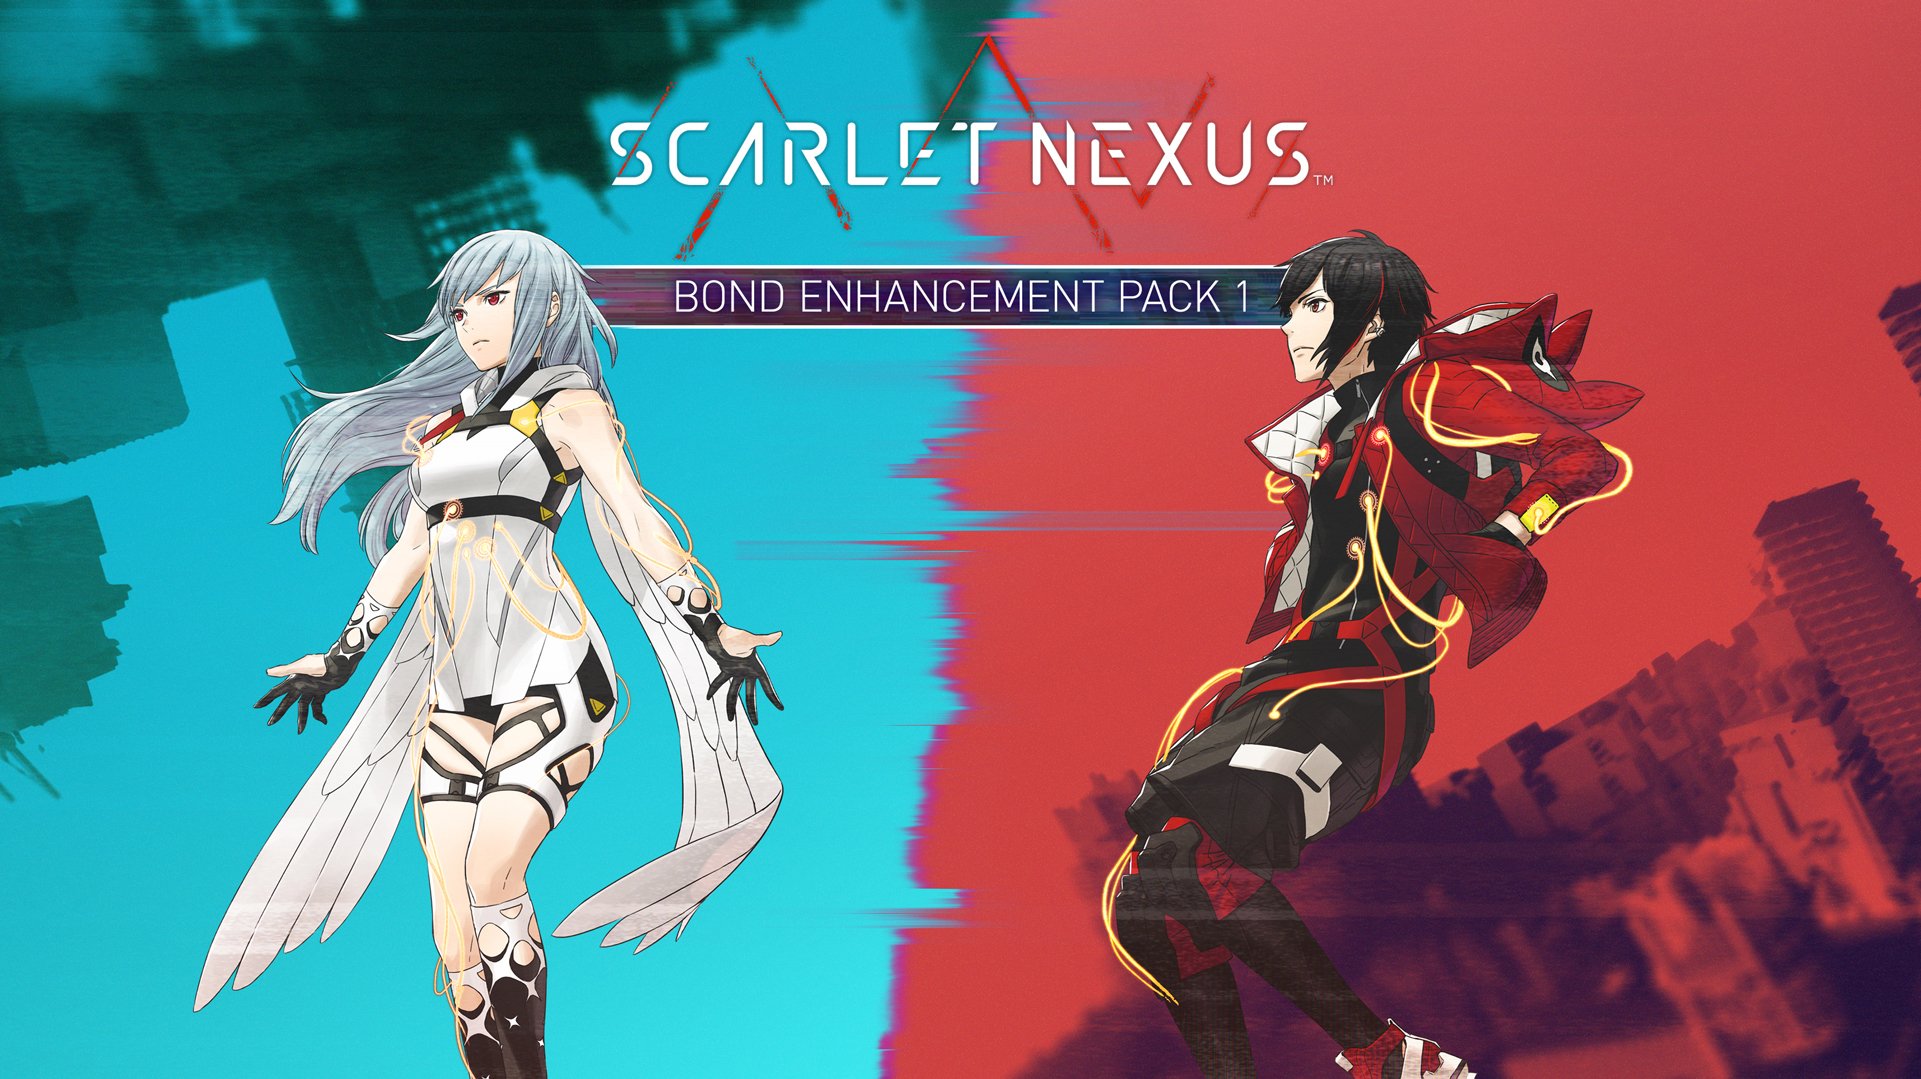 How to Get New Skins & Change the Visuals Skin in Scarlet Nexus